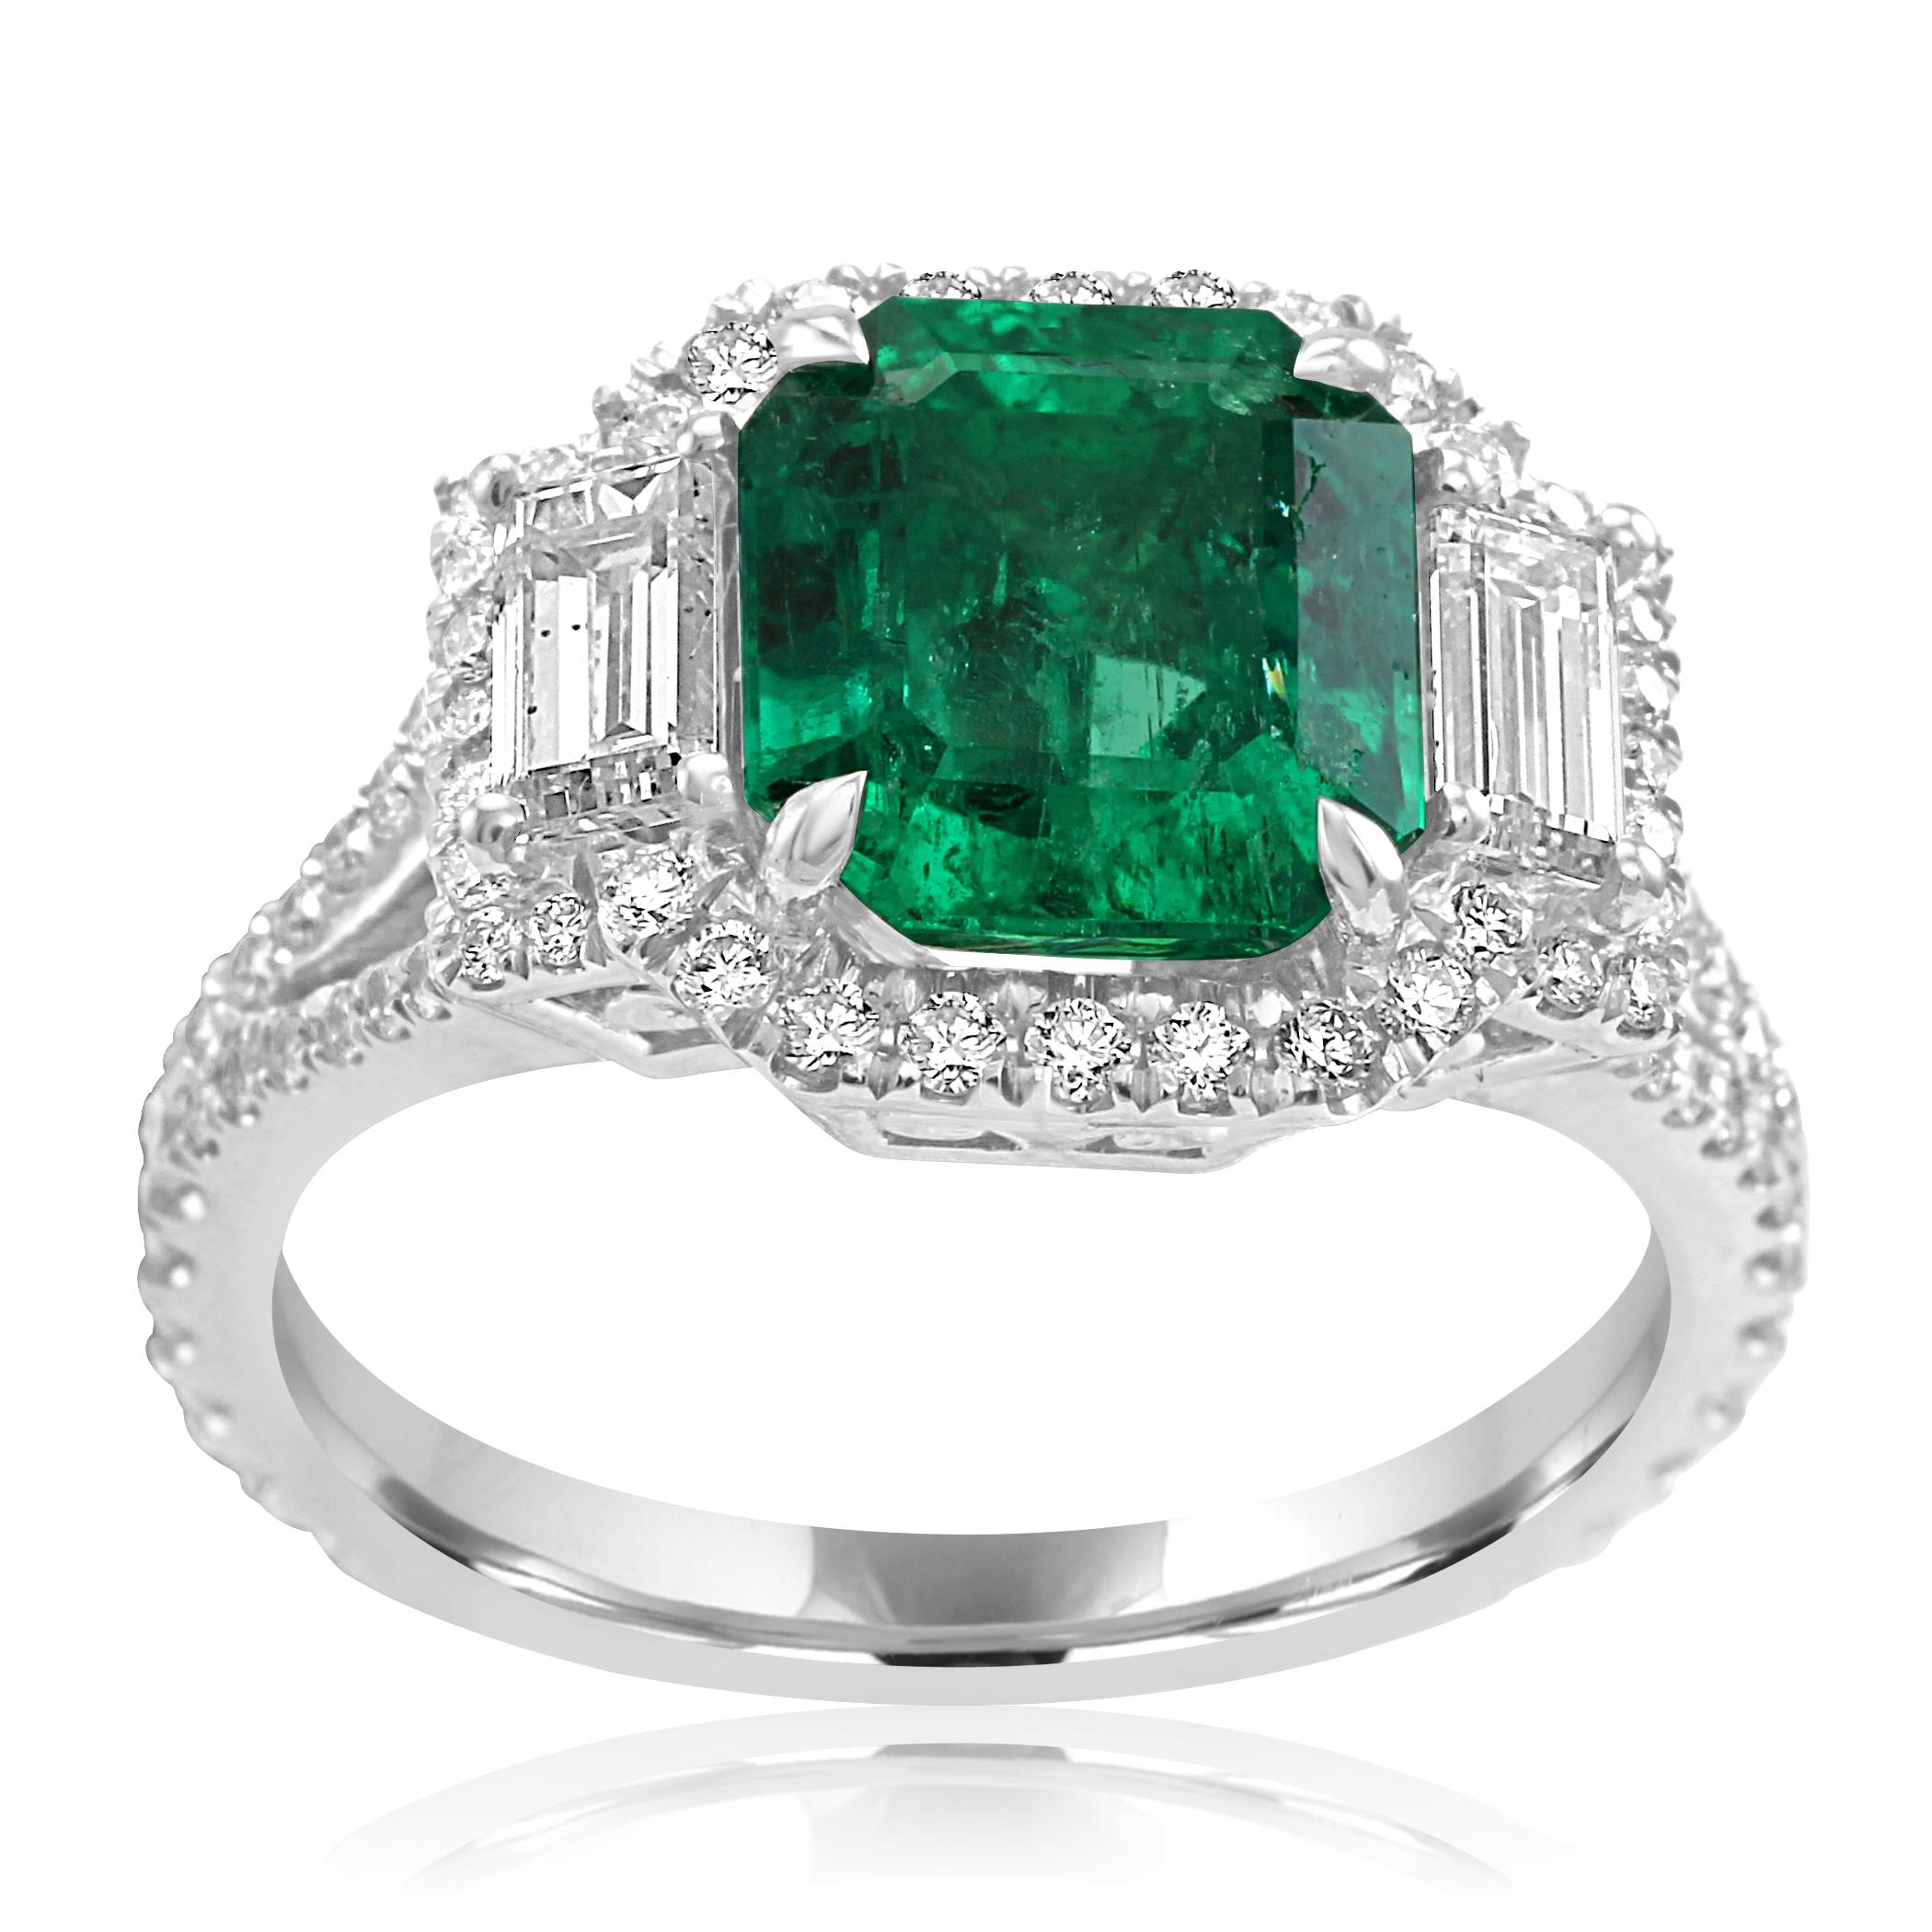 Stunning Colombian Emerald, Emerald Cut 2.42 Carat flanked by 2 White G-H color VS-SI clarity Diamond Baguettes 0.57 carat encircled in a single Halo of White G-H Color VS-SI Clarity 0.70 Carat set in Gorgeous 18K White Gold Three Stone Fashion